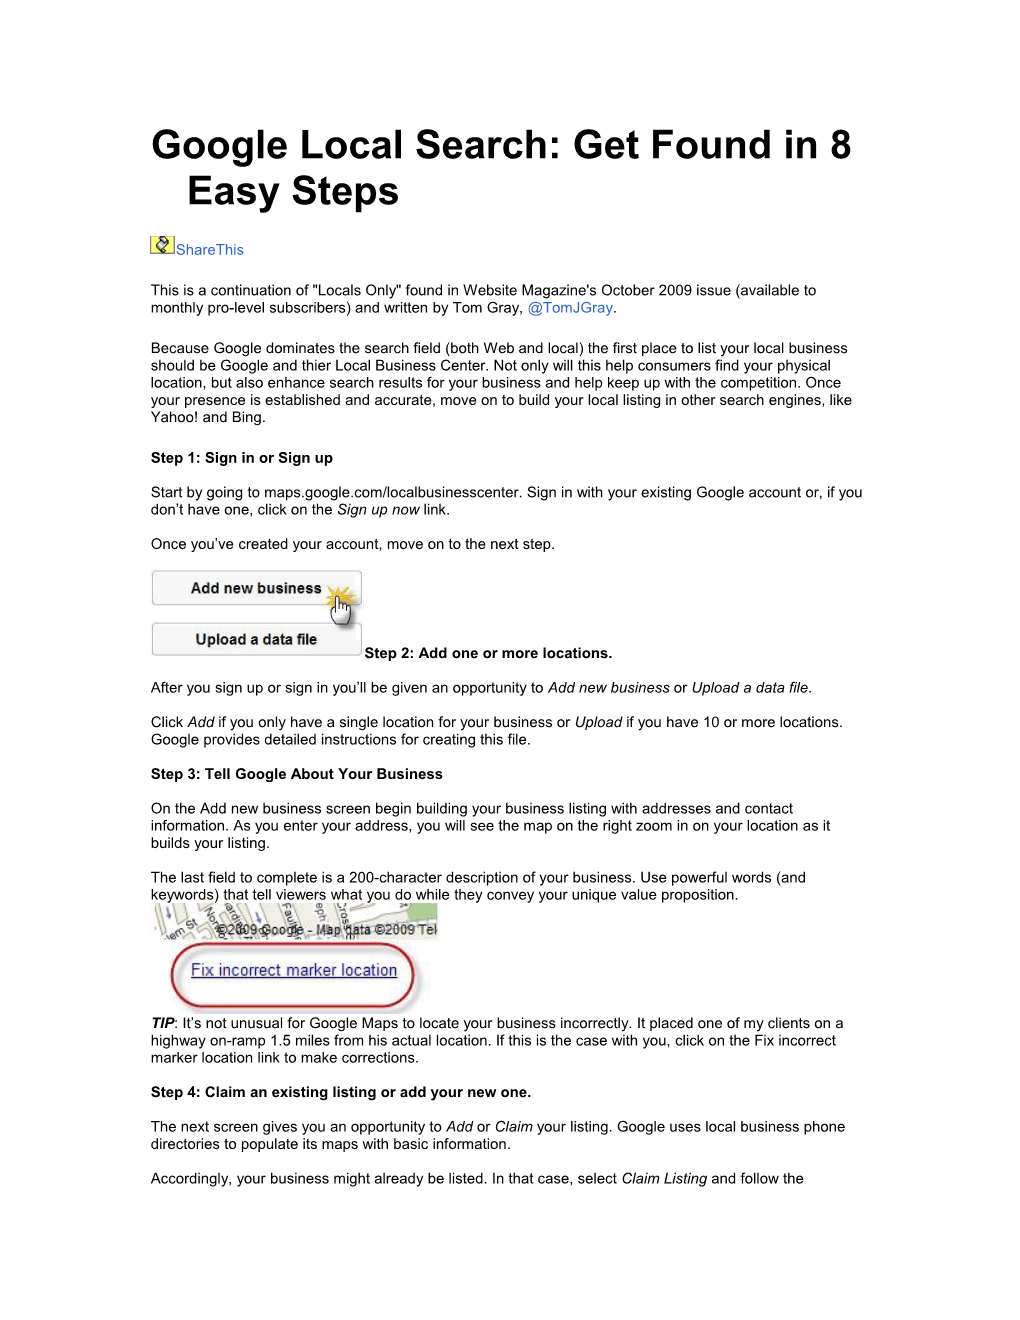 Google Local Search: Get Found in 8 Easy Steps